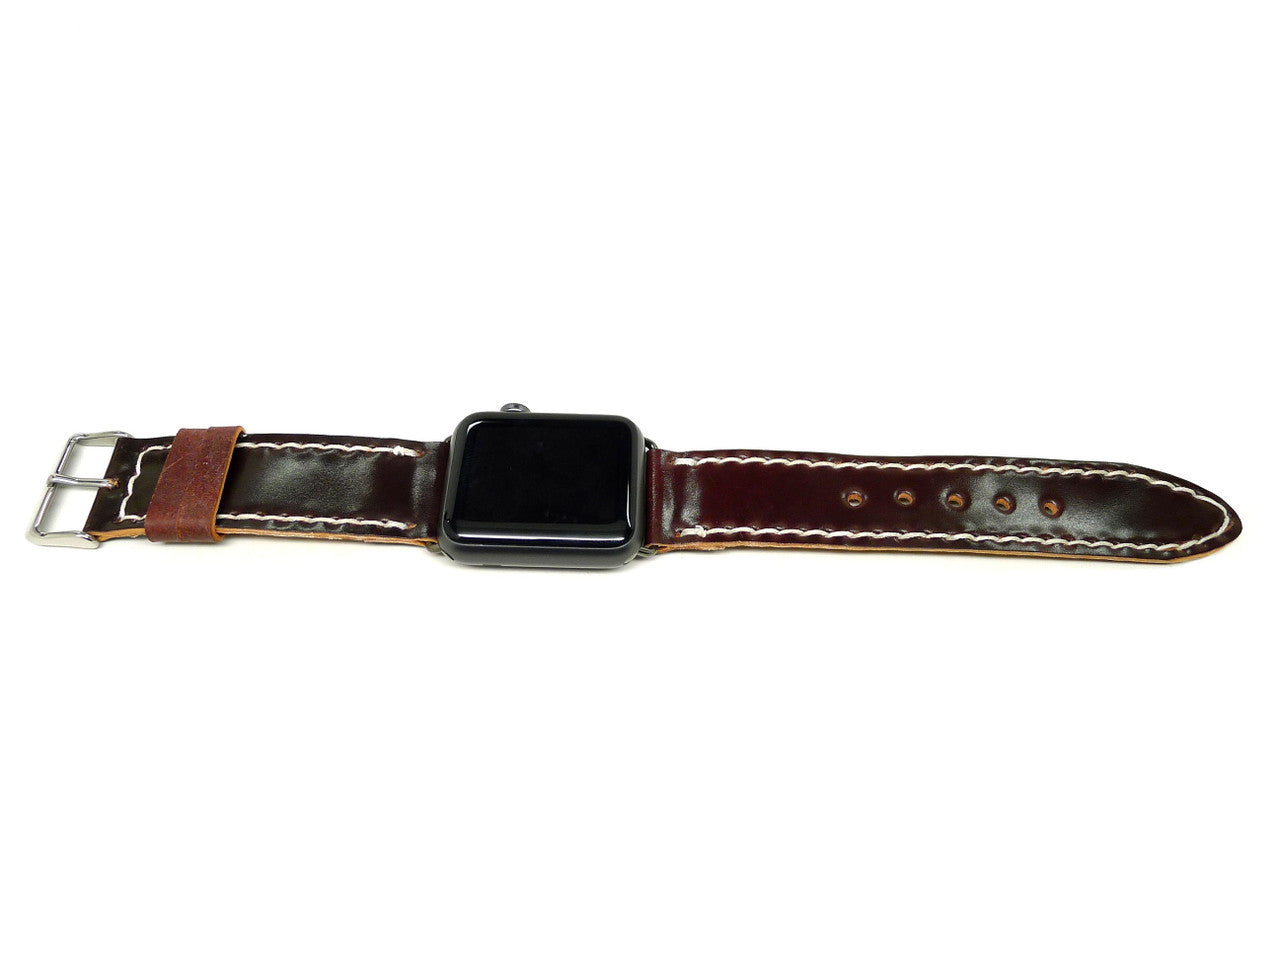 Coupper Watch Strap - Large